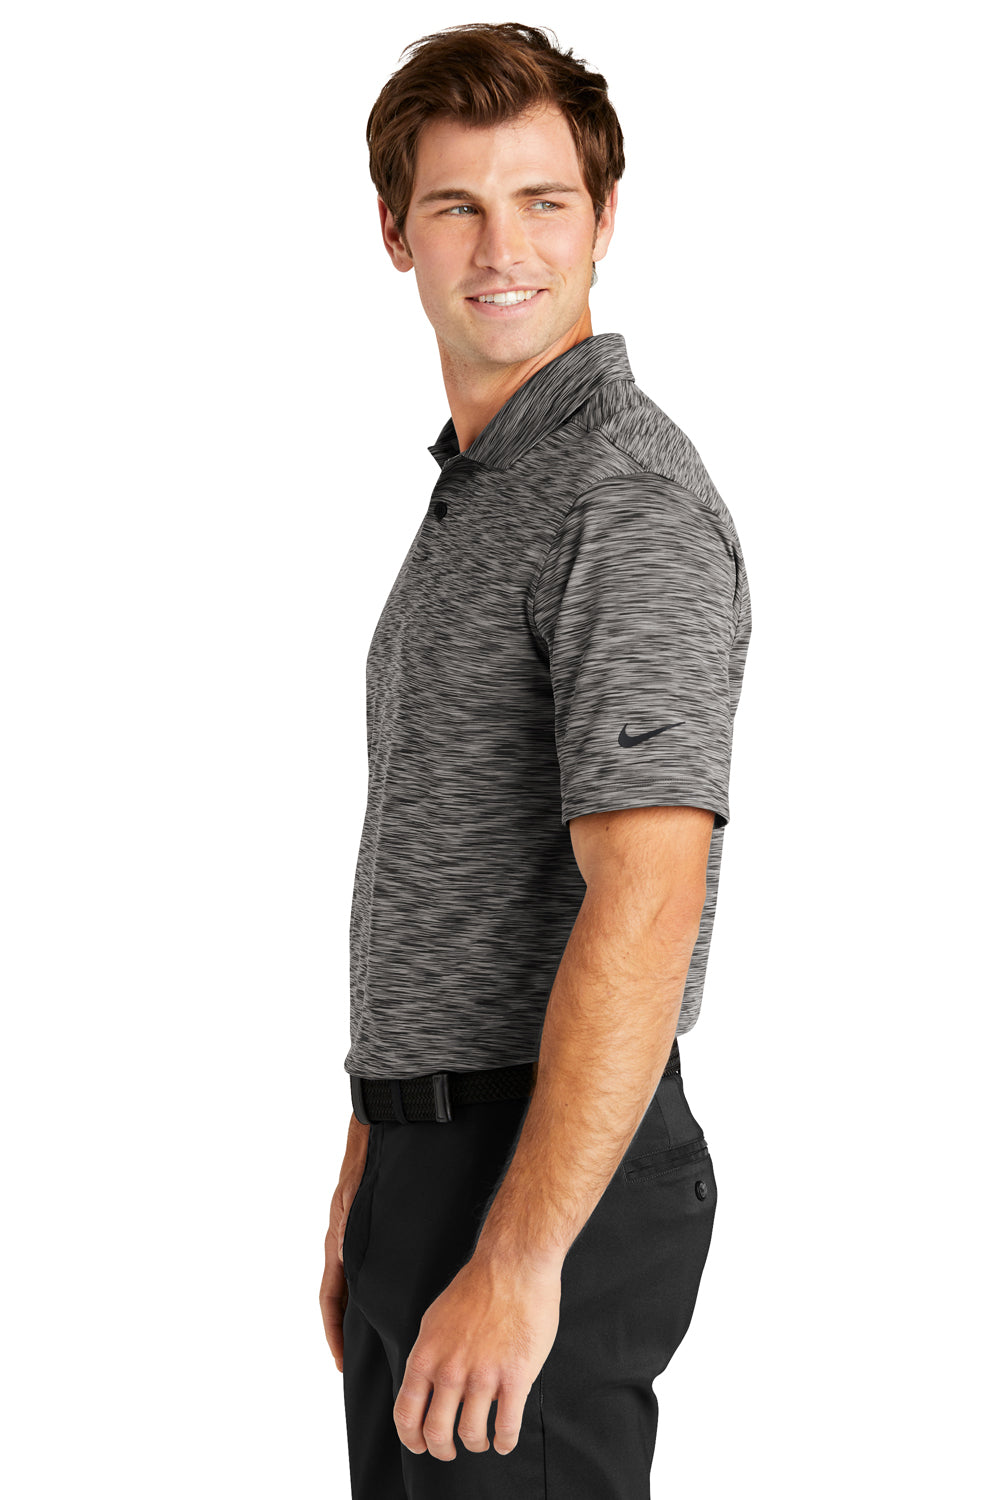 Nike NKDC2109 Mens Vapor Space Dyed Dri-Fit Moisture Wicking Short Sleeve Polo Shirt Anthracite Grey Model Side